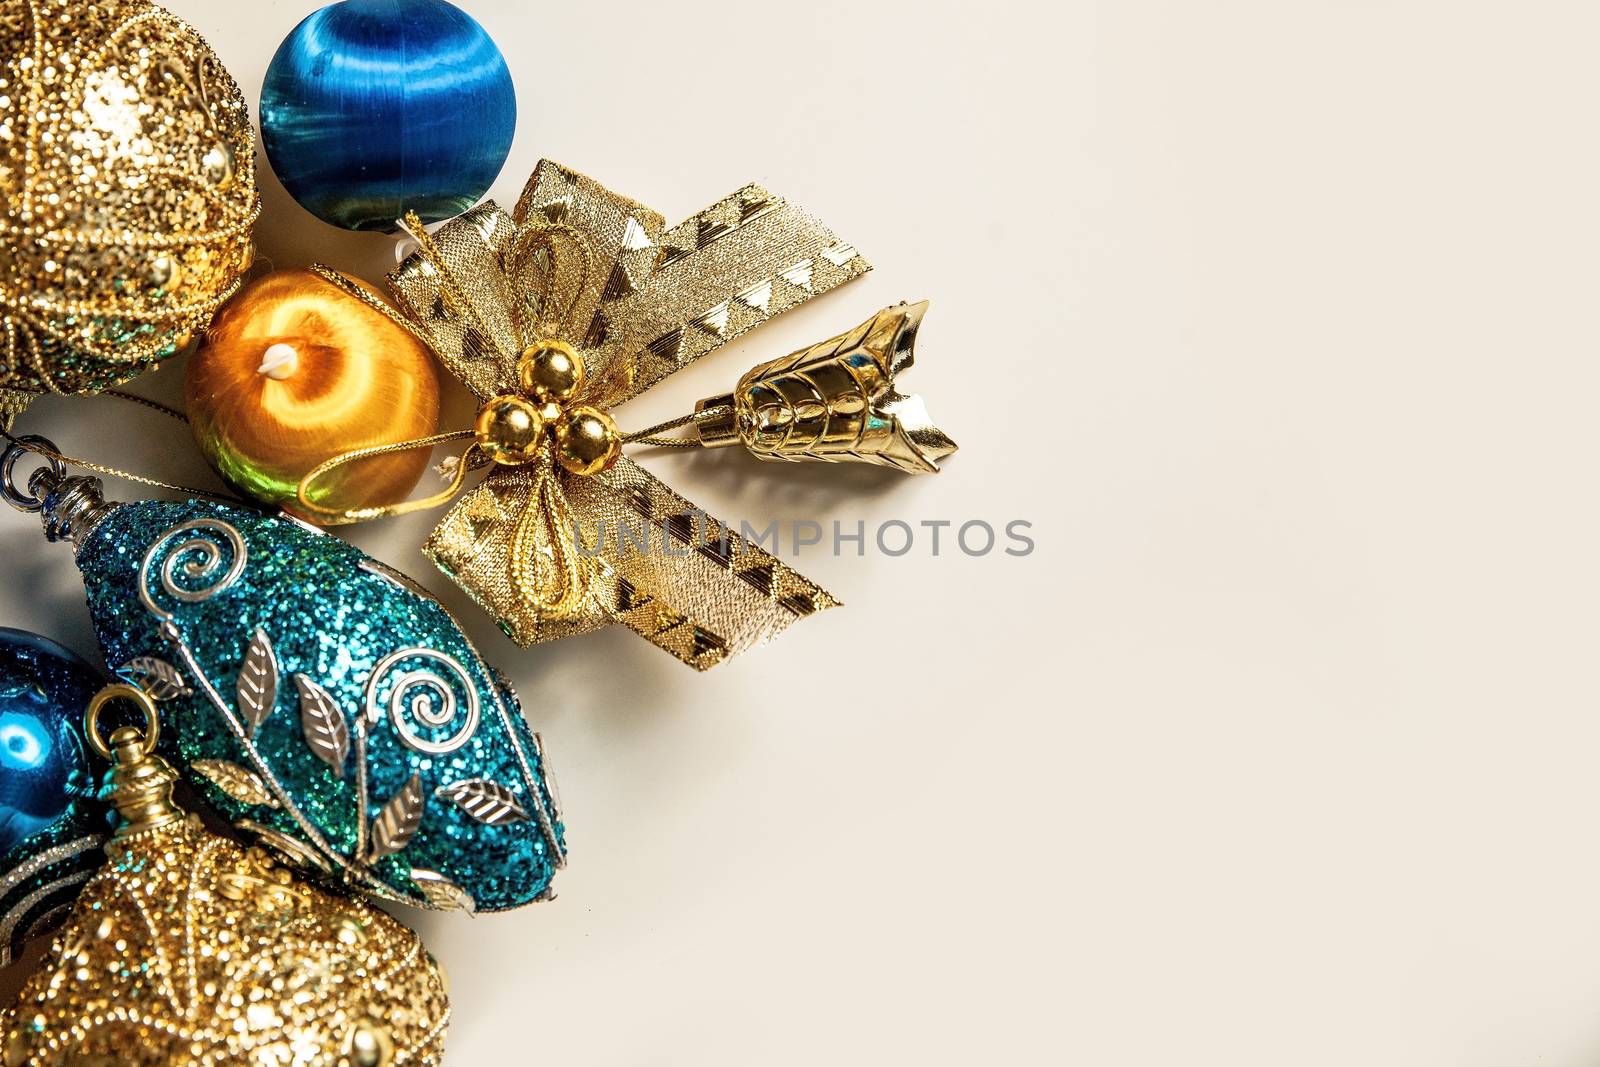 Christmas 2019 with blue and golden decor by mi_viri